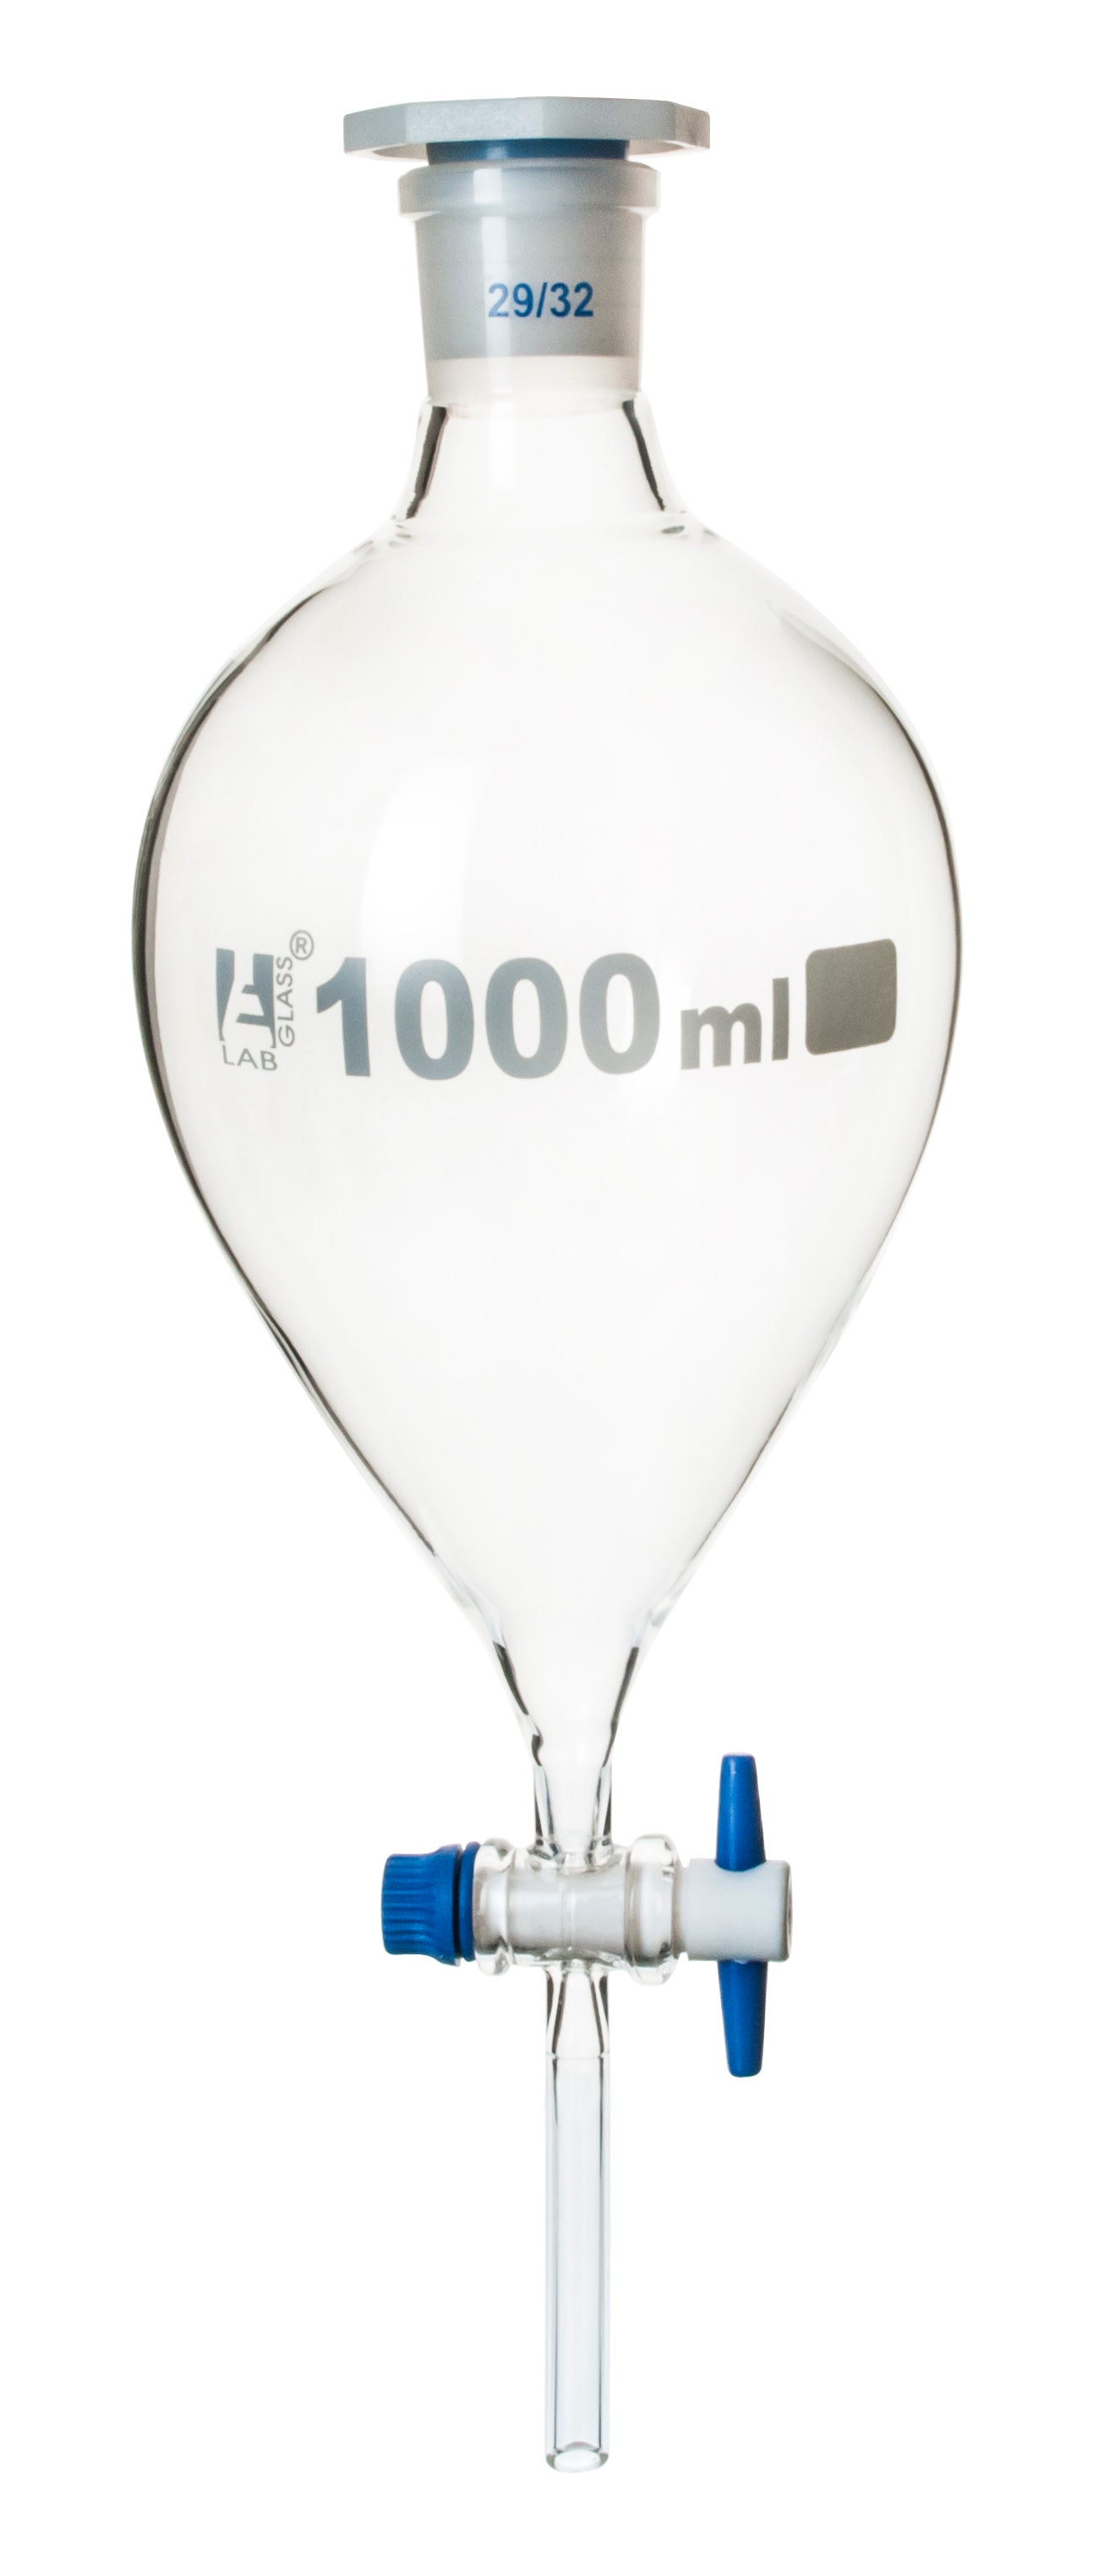 Glass Squibb Separatory Funnel with PTFE Key Stopcock and Interchangeable Polypropylene Stopper, 1,000 ml, Autoclavable